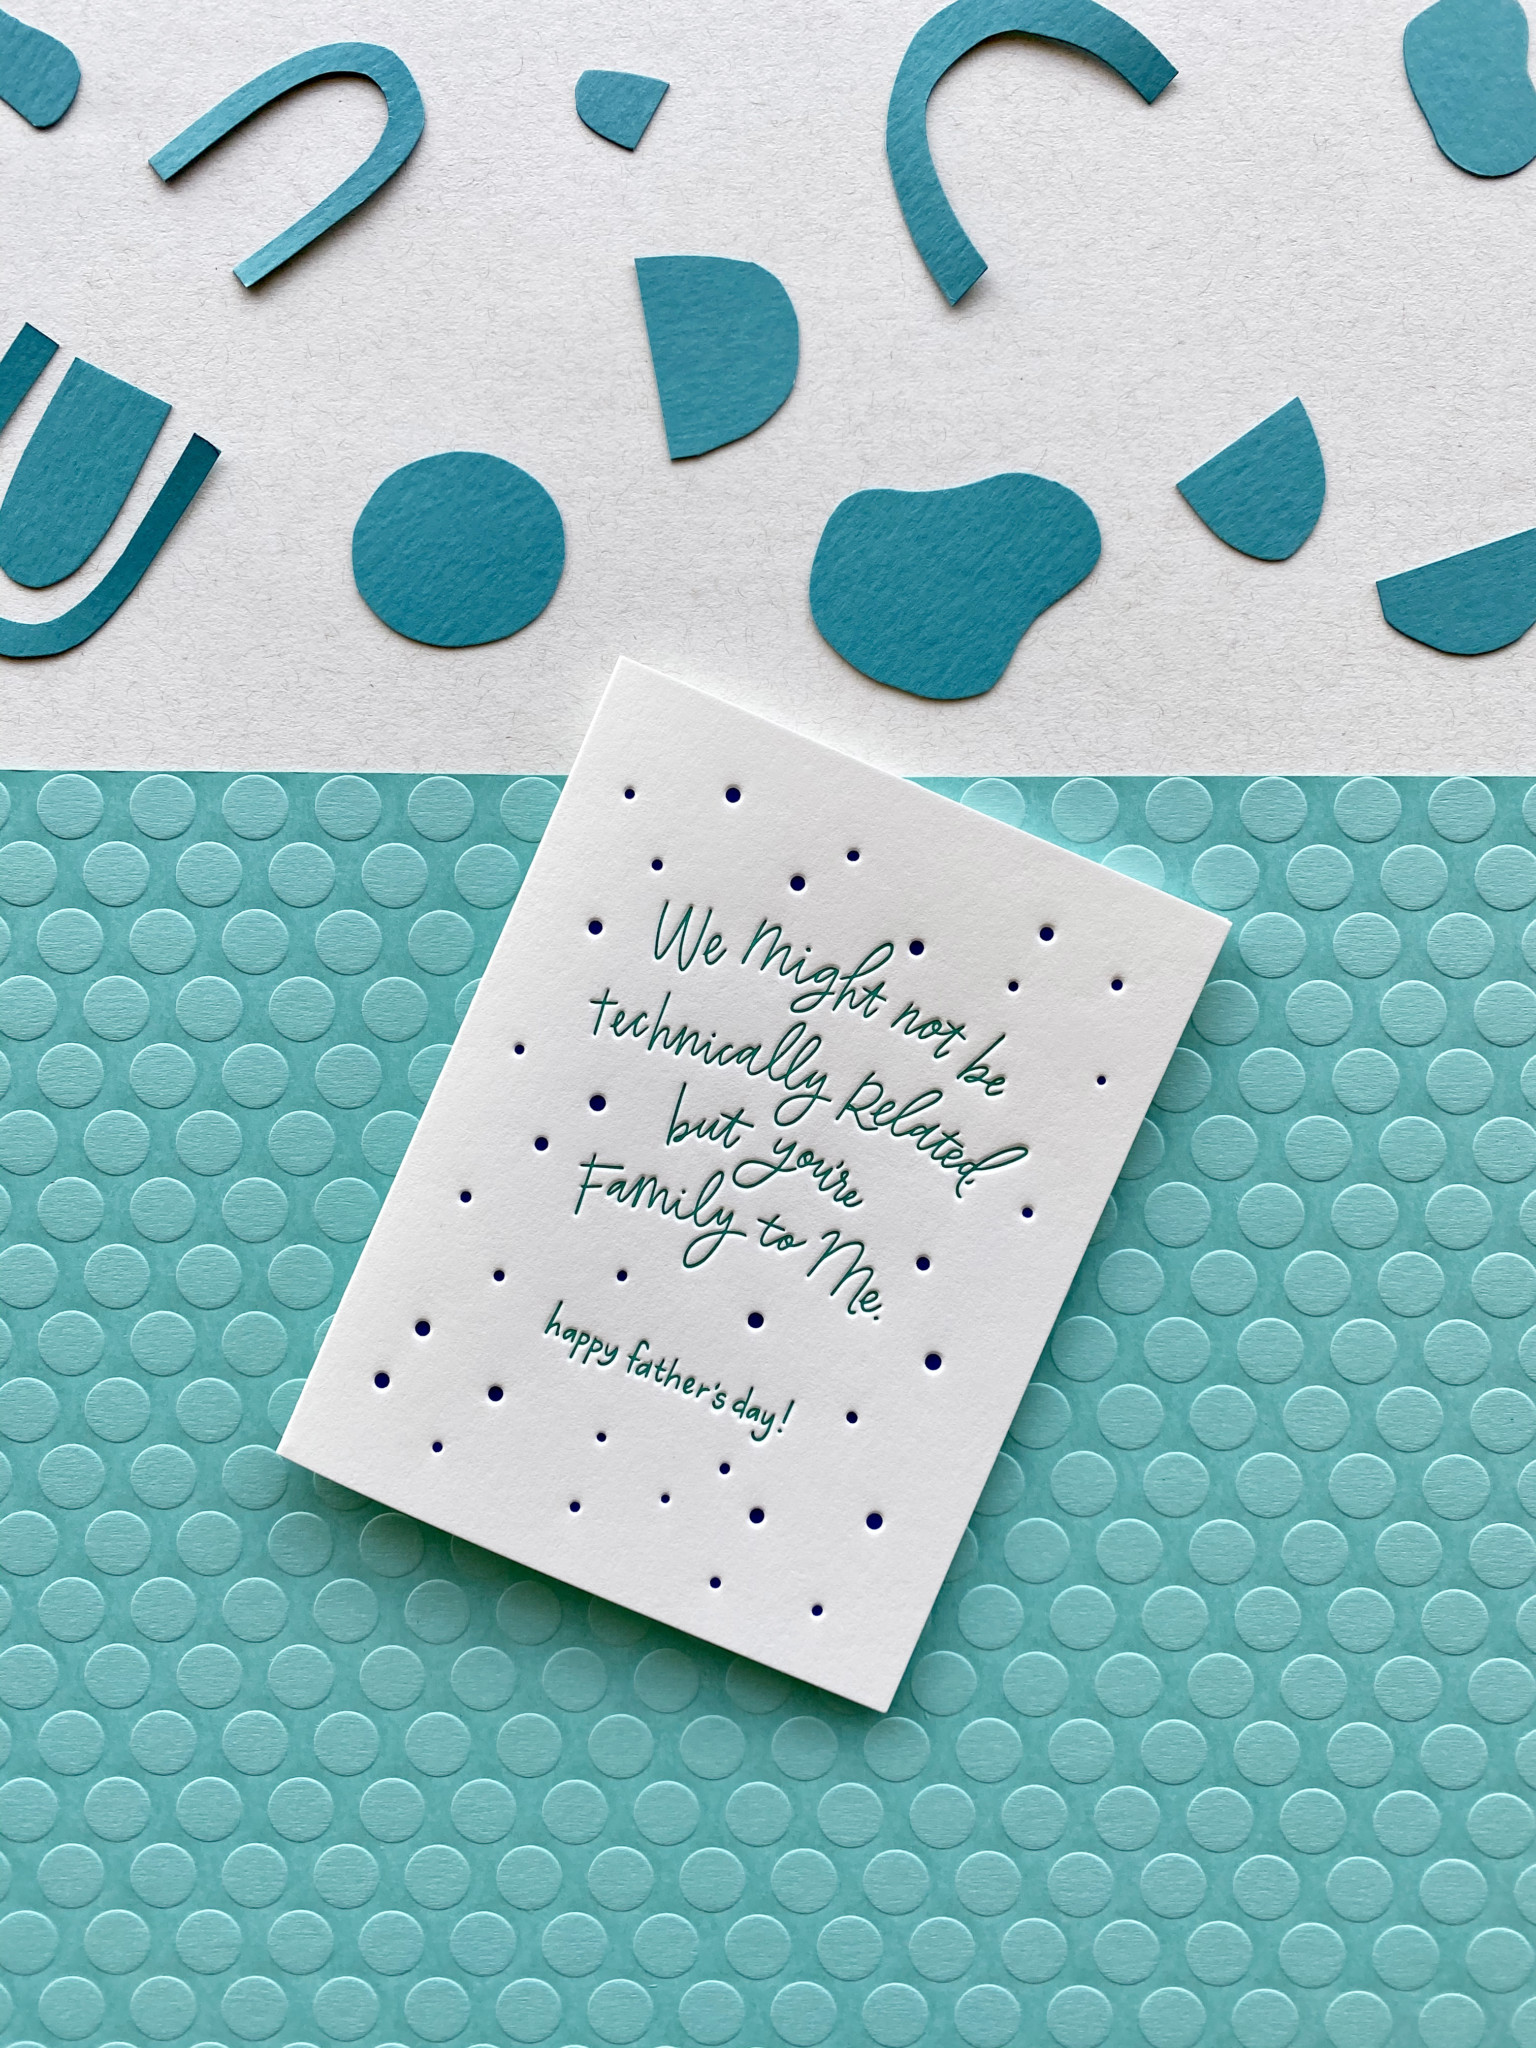 Greeting Card reads We Might not be technically related, but you're family to me. Happy Father's Day!